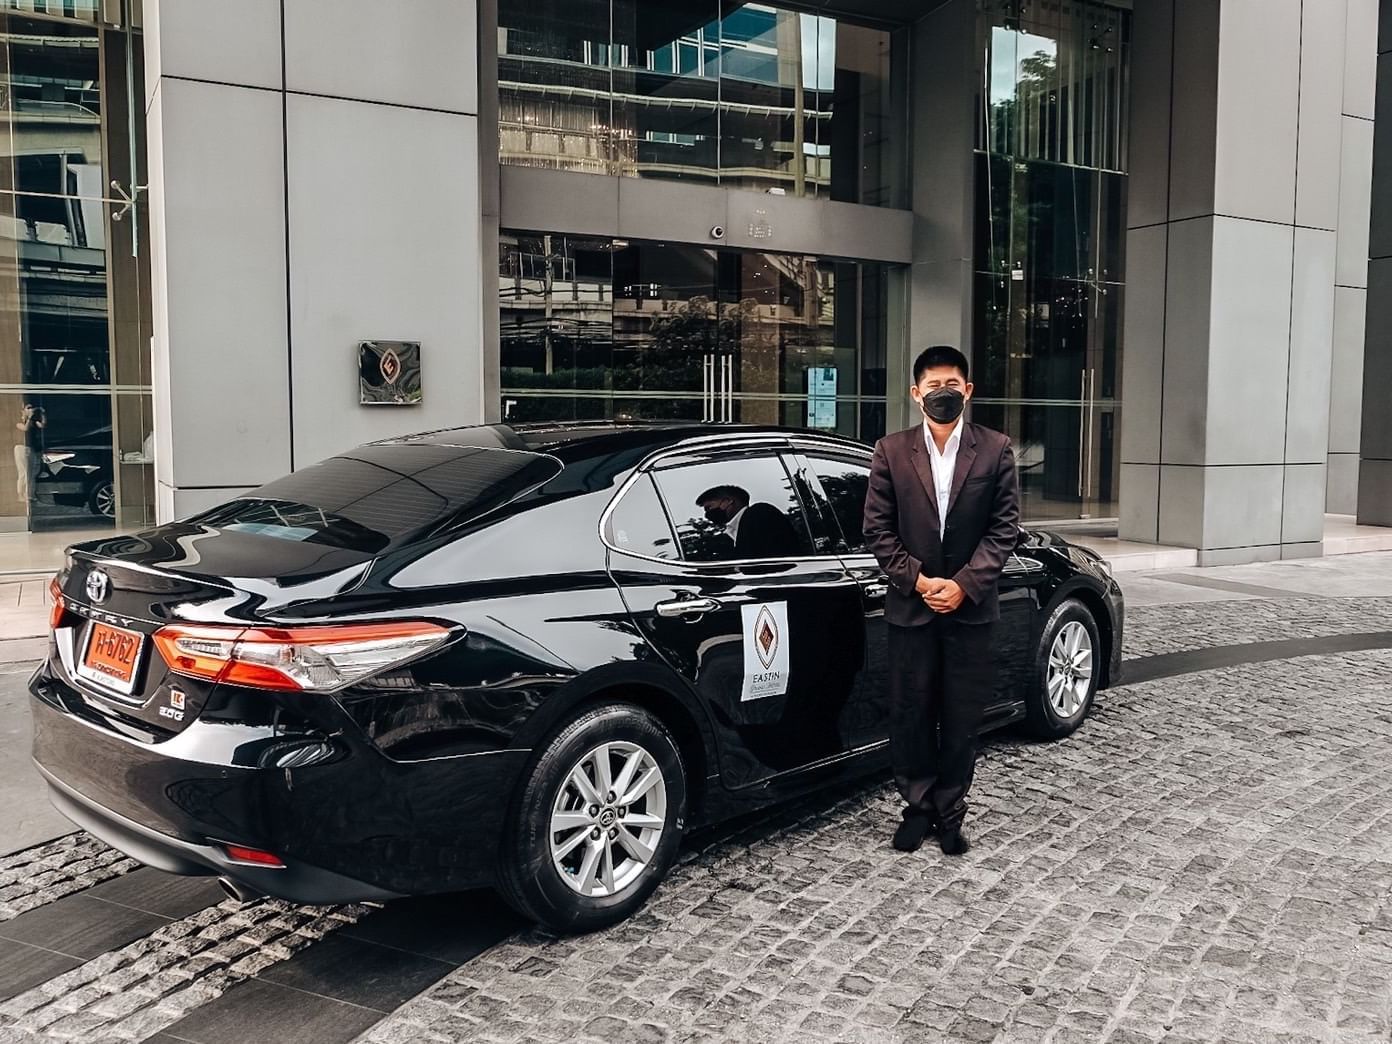 Chauffeur standing by the Limousine car at Eastin Grand Hotel Sathorn